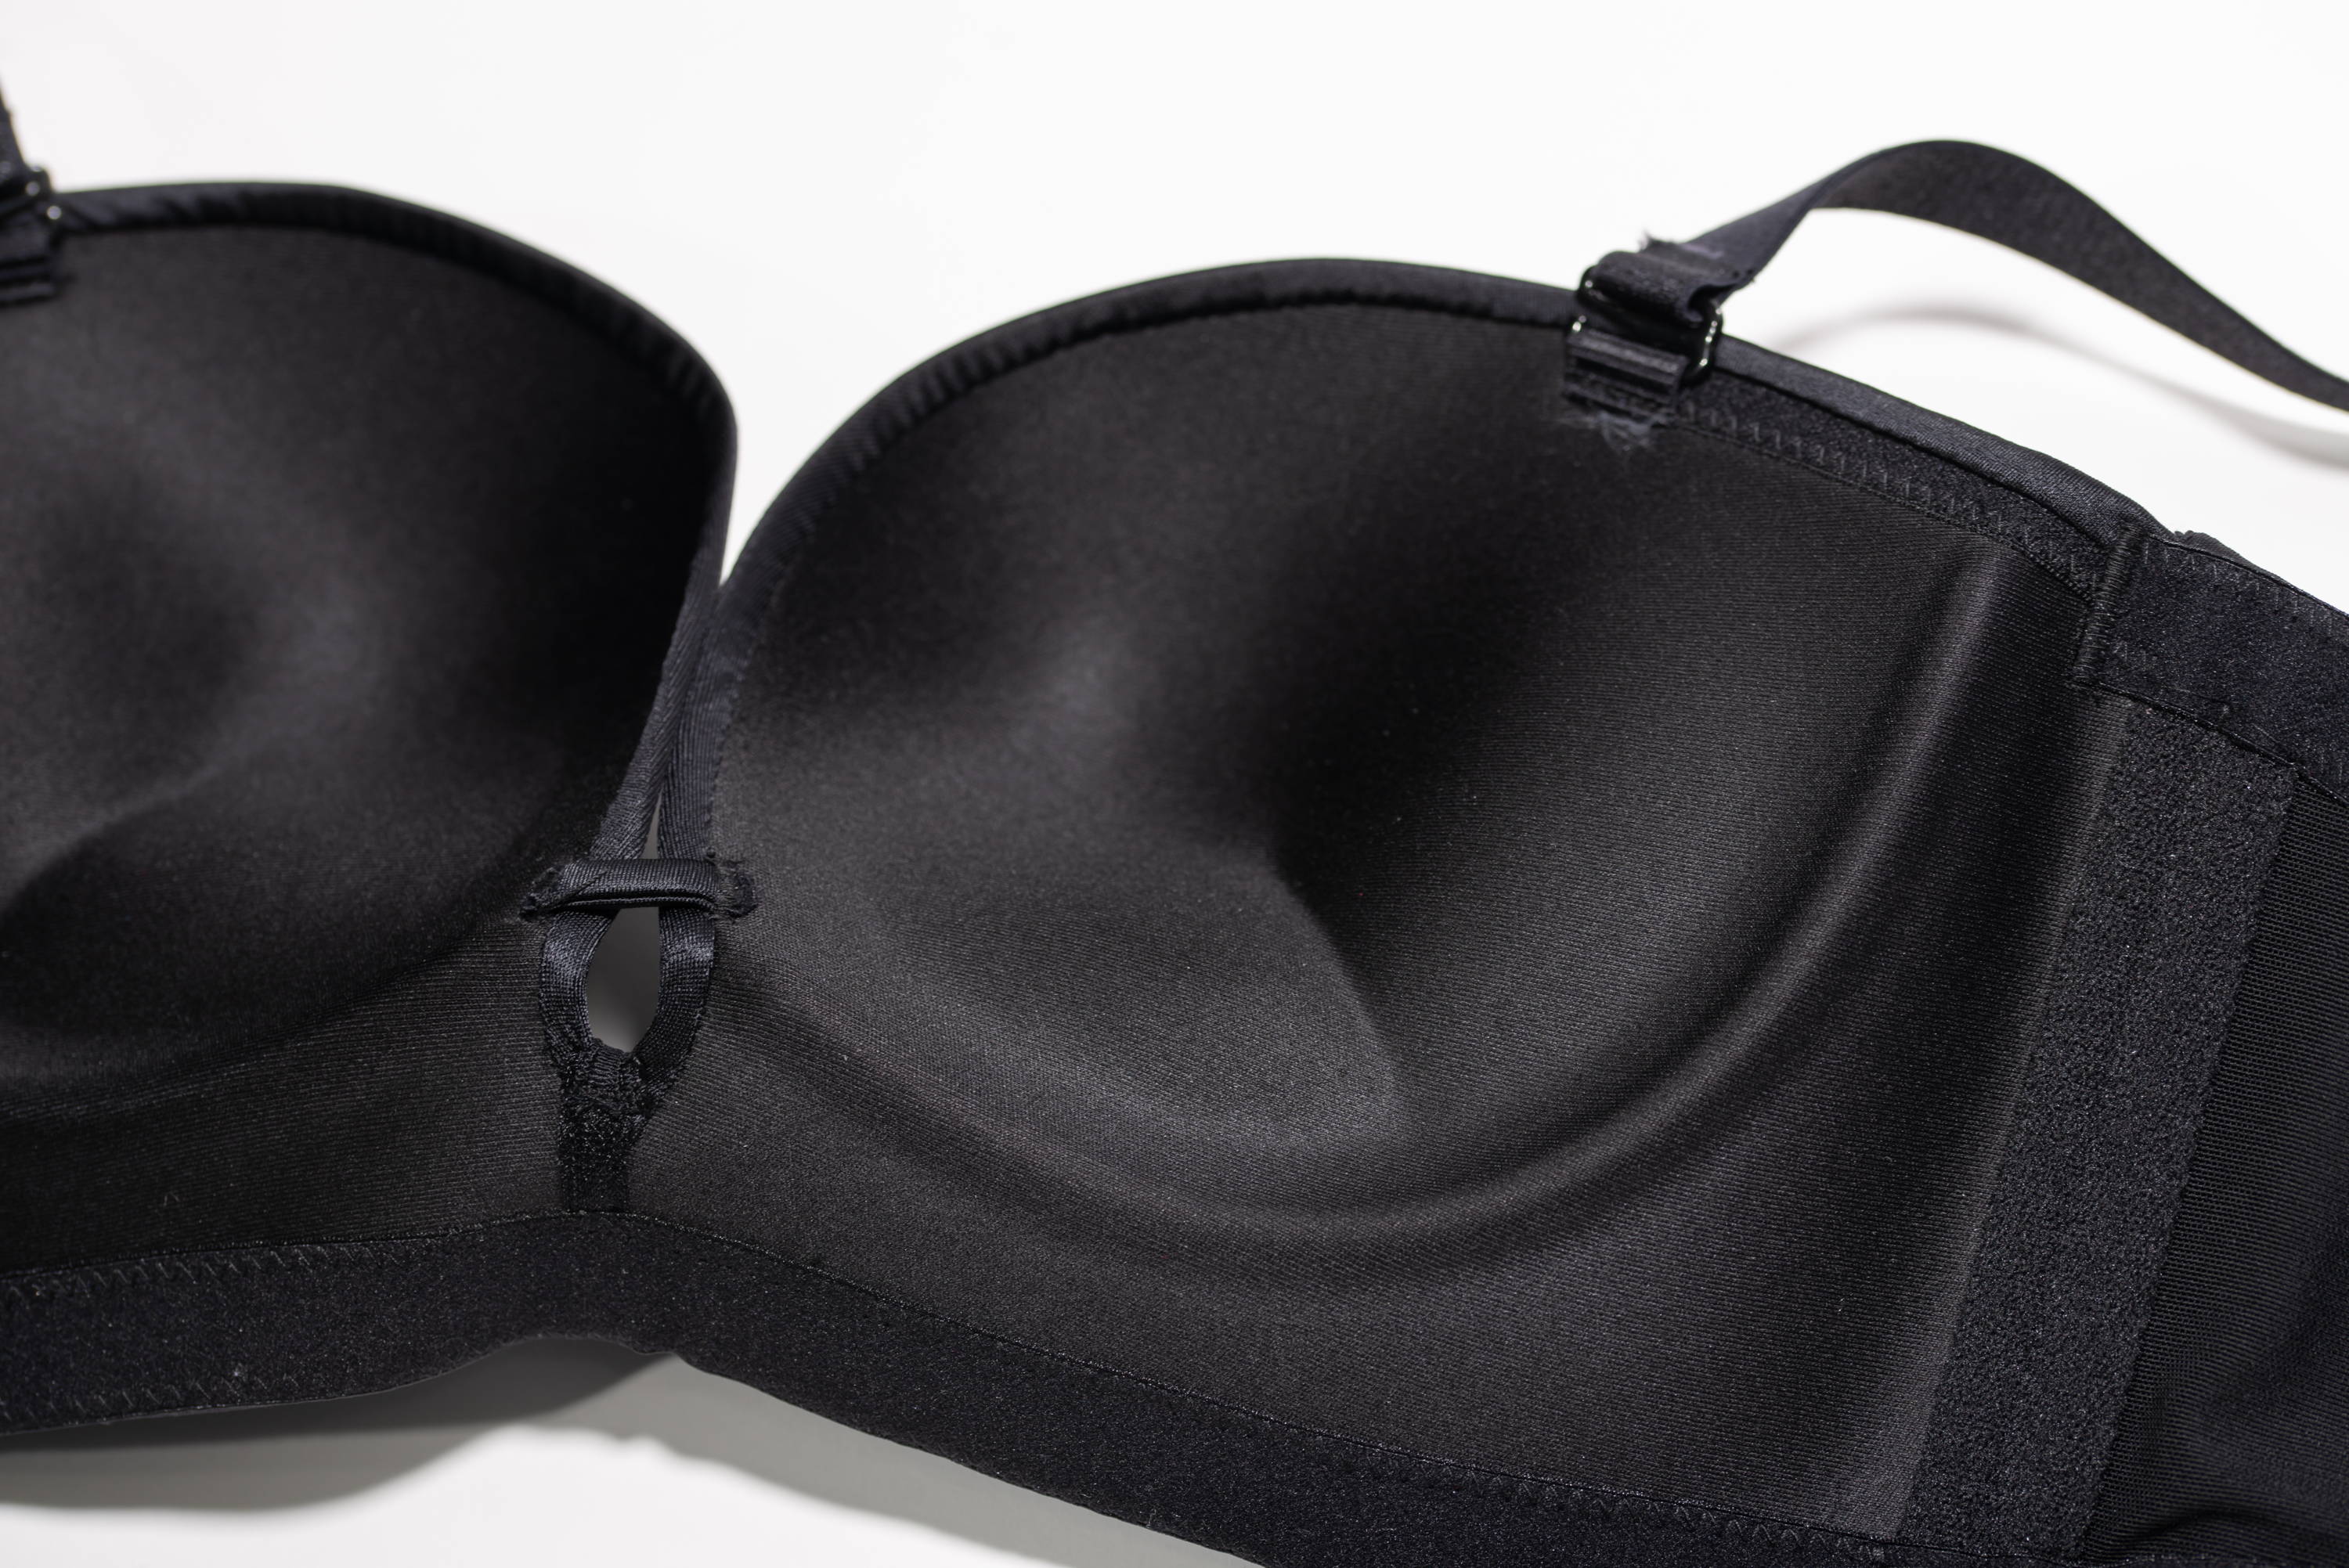 Molded Cup : Bras